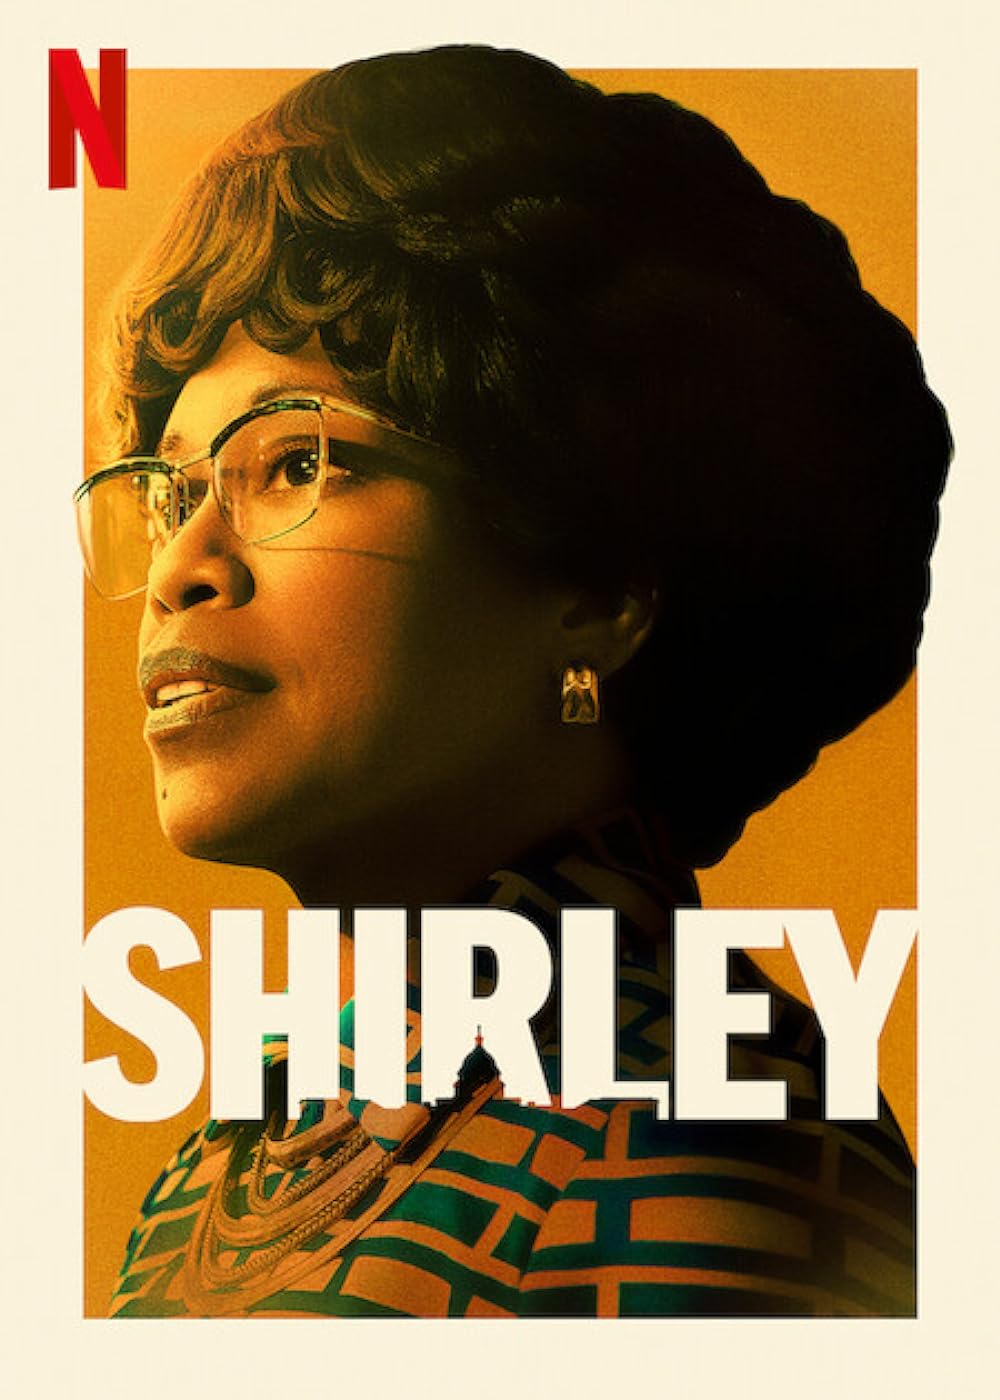 Shirley - March 22 - Streaming on NetflixShirley is a biographical drama that intimately portrays Shirley Chisholm, the first Black Congresswoman and the first Black woman to run for President of the United States. Highlighting her groundbreaking 1972 presidential campaign, the film draws on exclusive conversations with those who knew her well, exploring the personal and political challenges she faced while underlining the significant cost of her accomplishments. 